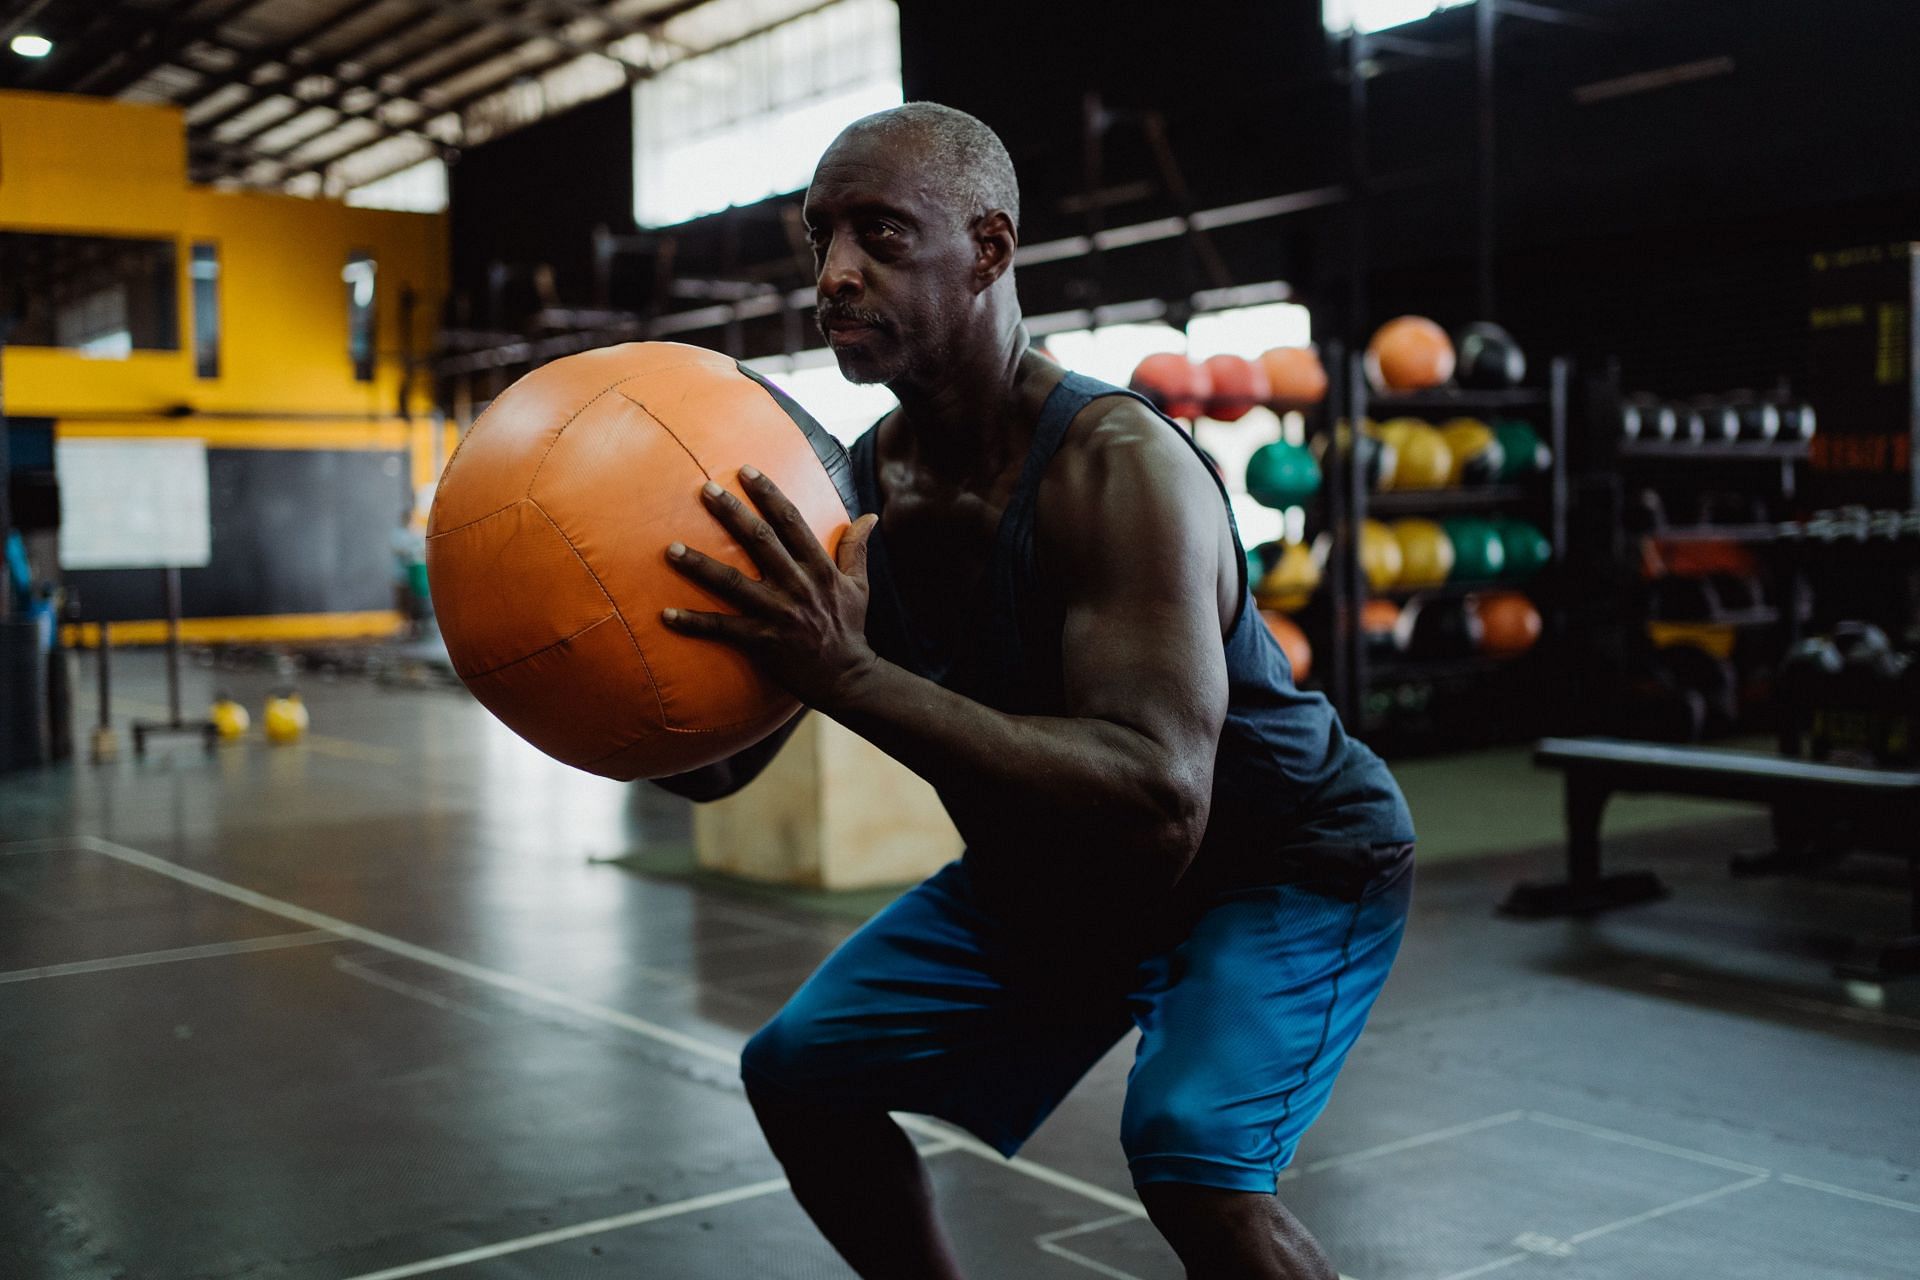 Medicine ball slams are one of the best ways to target your core. (Image via Pexels/Ketut Subiyanto)